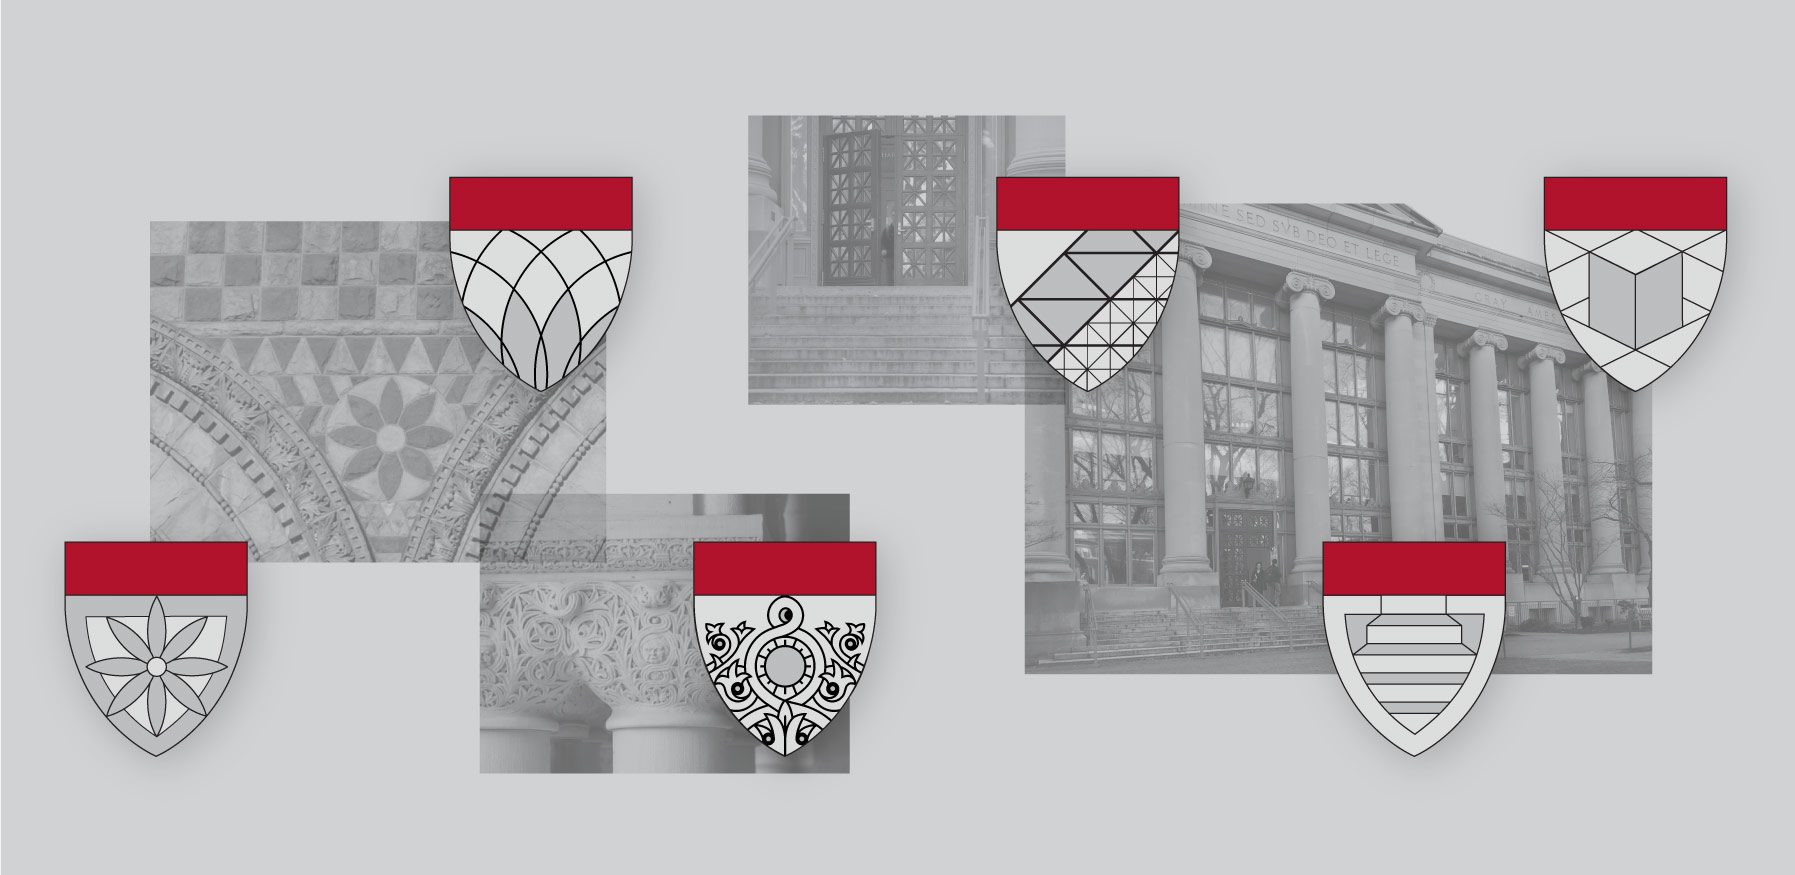 Collage of architectural details and the design sketches they inspired